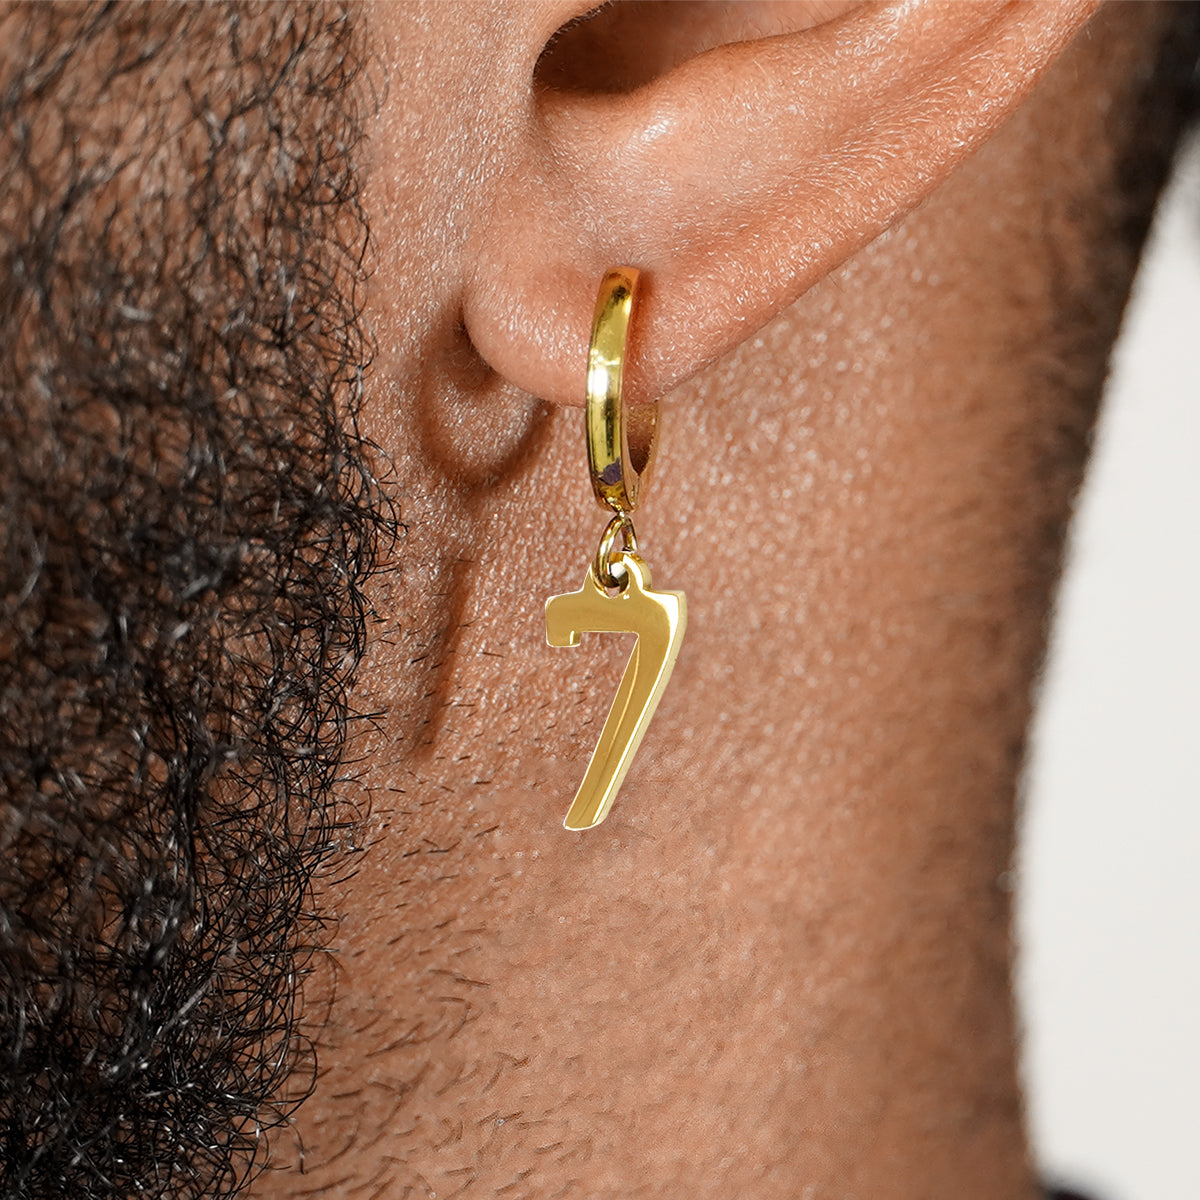 7 Number Earring - Gold Plated Stainless Steel